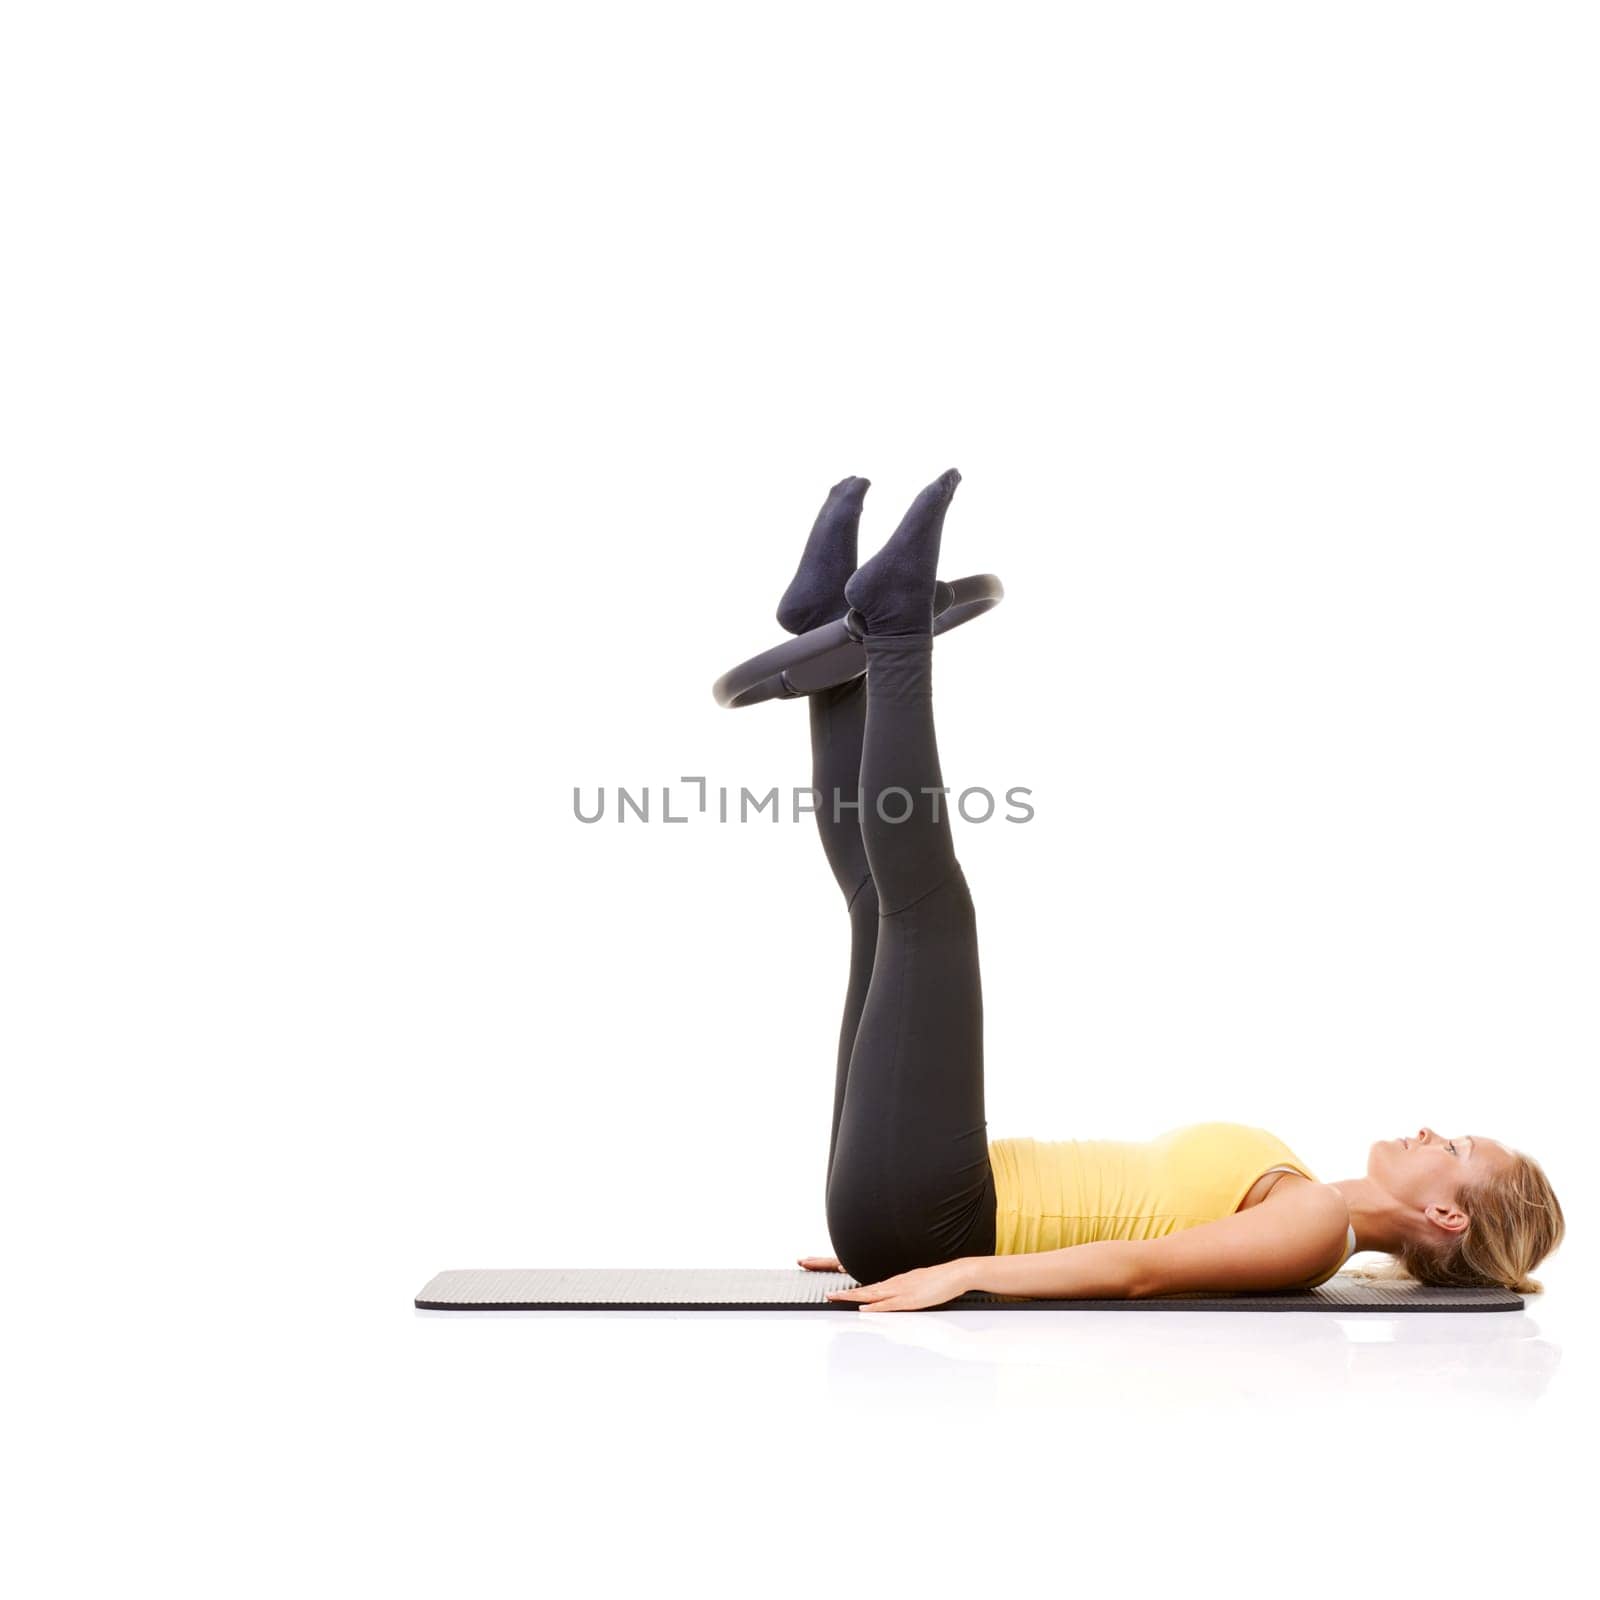 Woman, pilates ring and legs for workout on yoga mat for resistance training, strong thighs or studio white background. Female person, equipment for muscle flexibility or exercise, health or mockup.